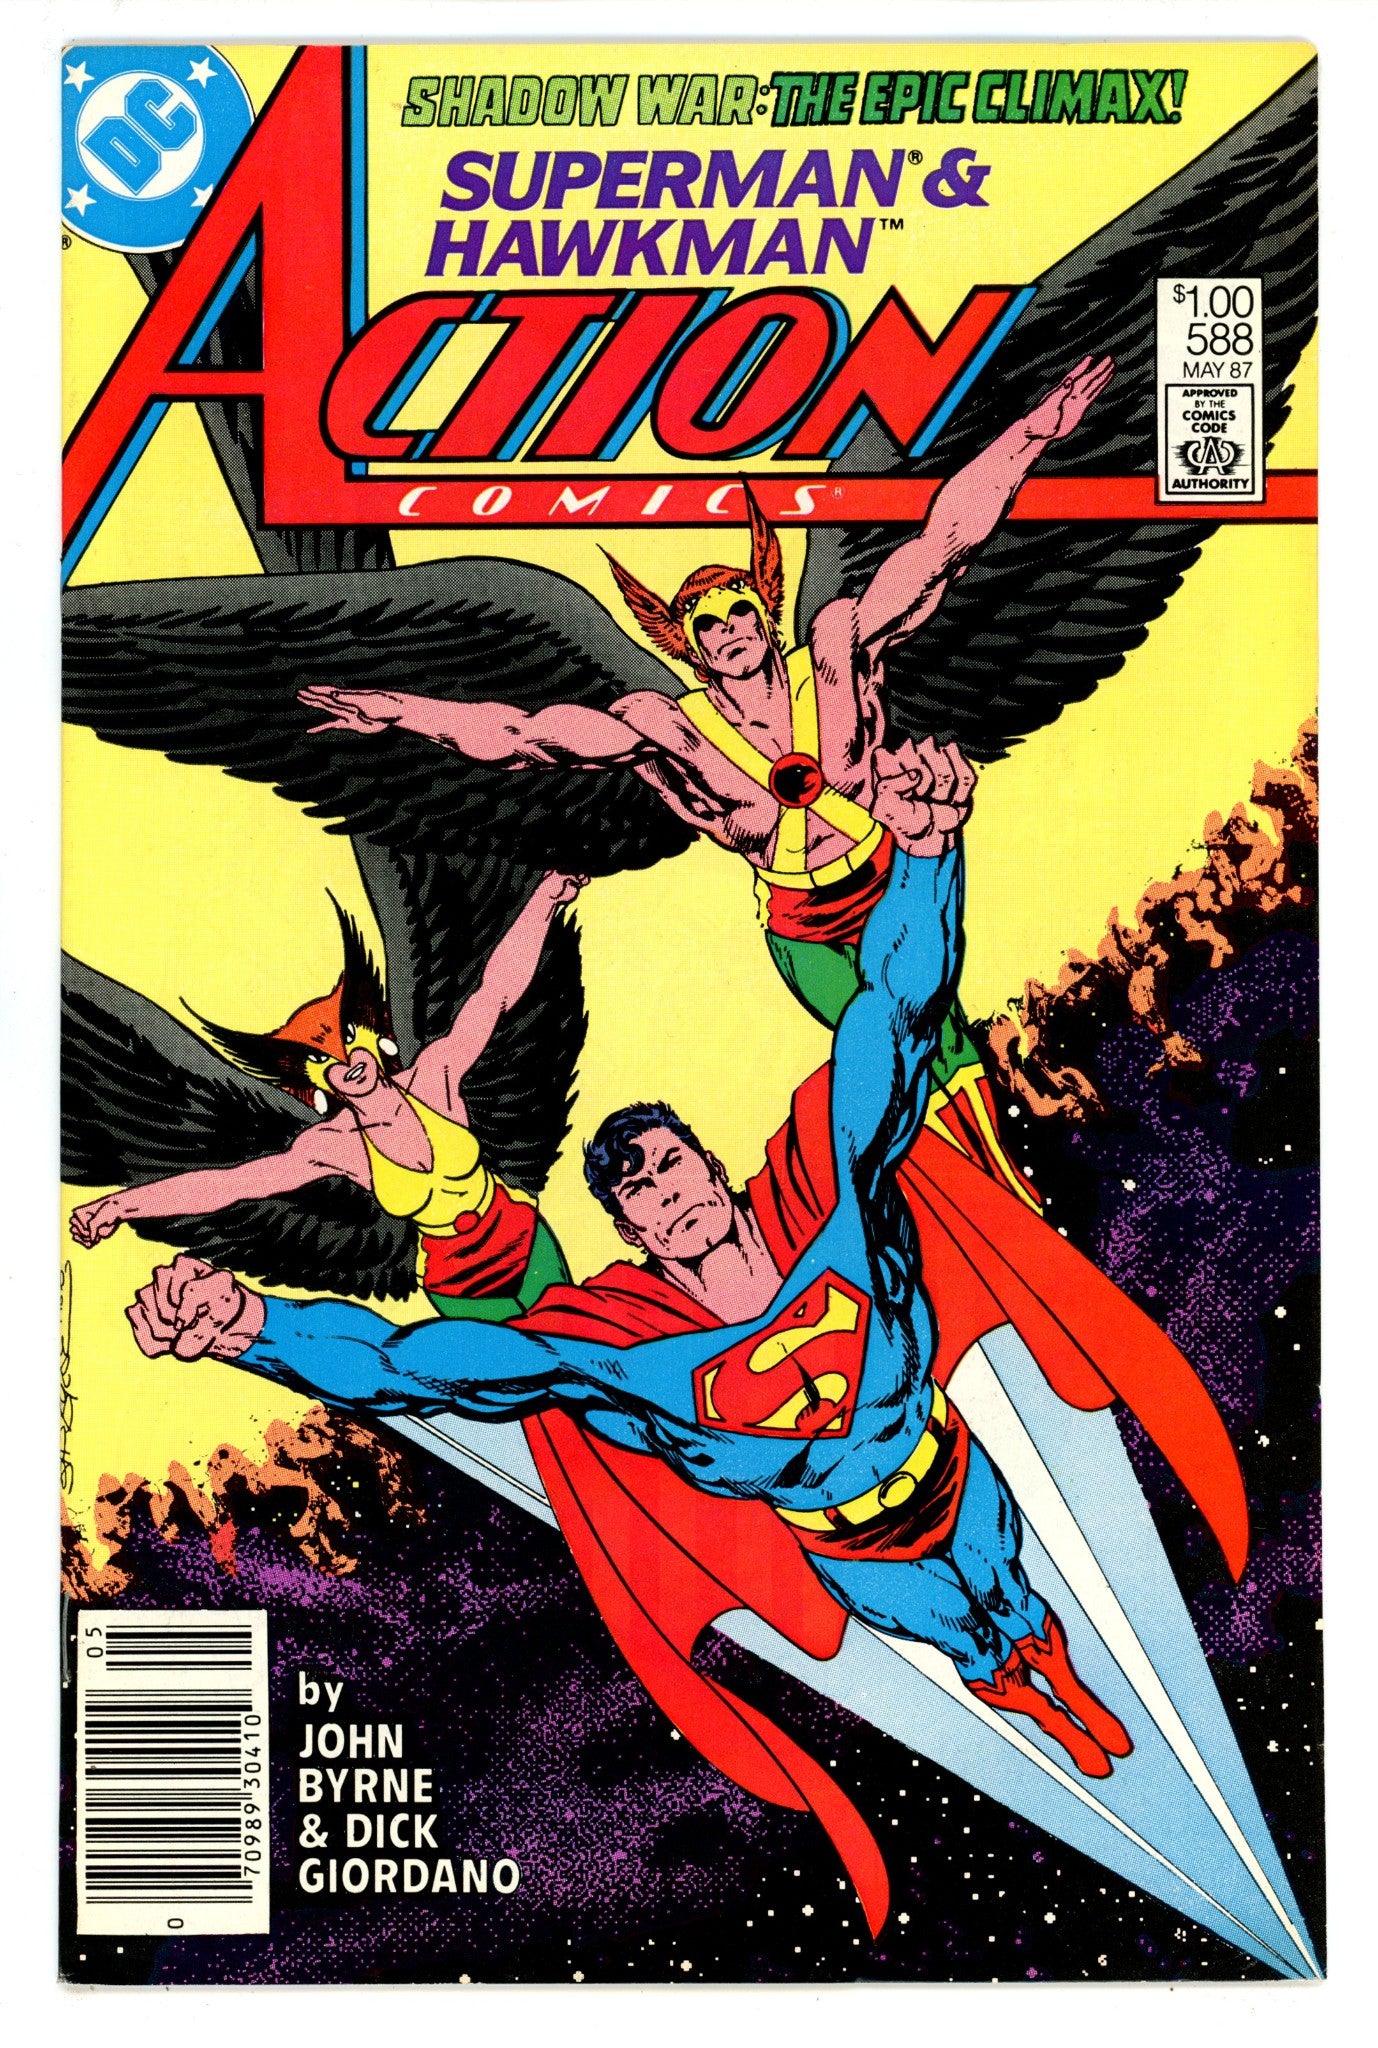 Action Comics Vol 1 588 FN+ (6.5) (1987) Canadian Price Variant 